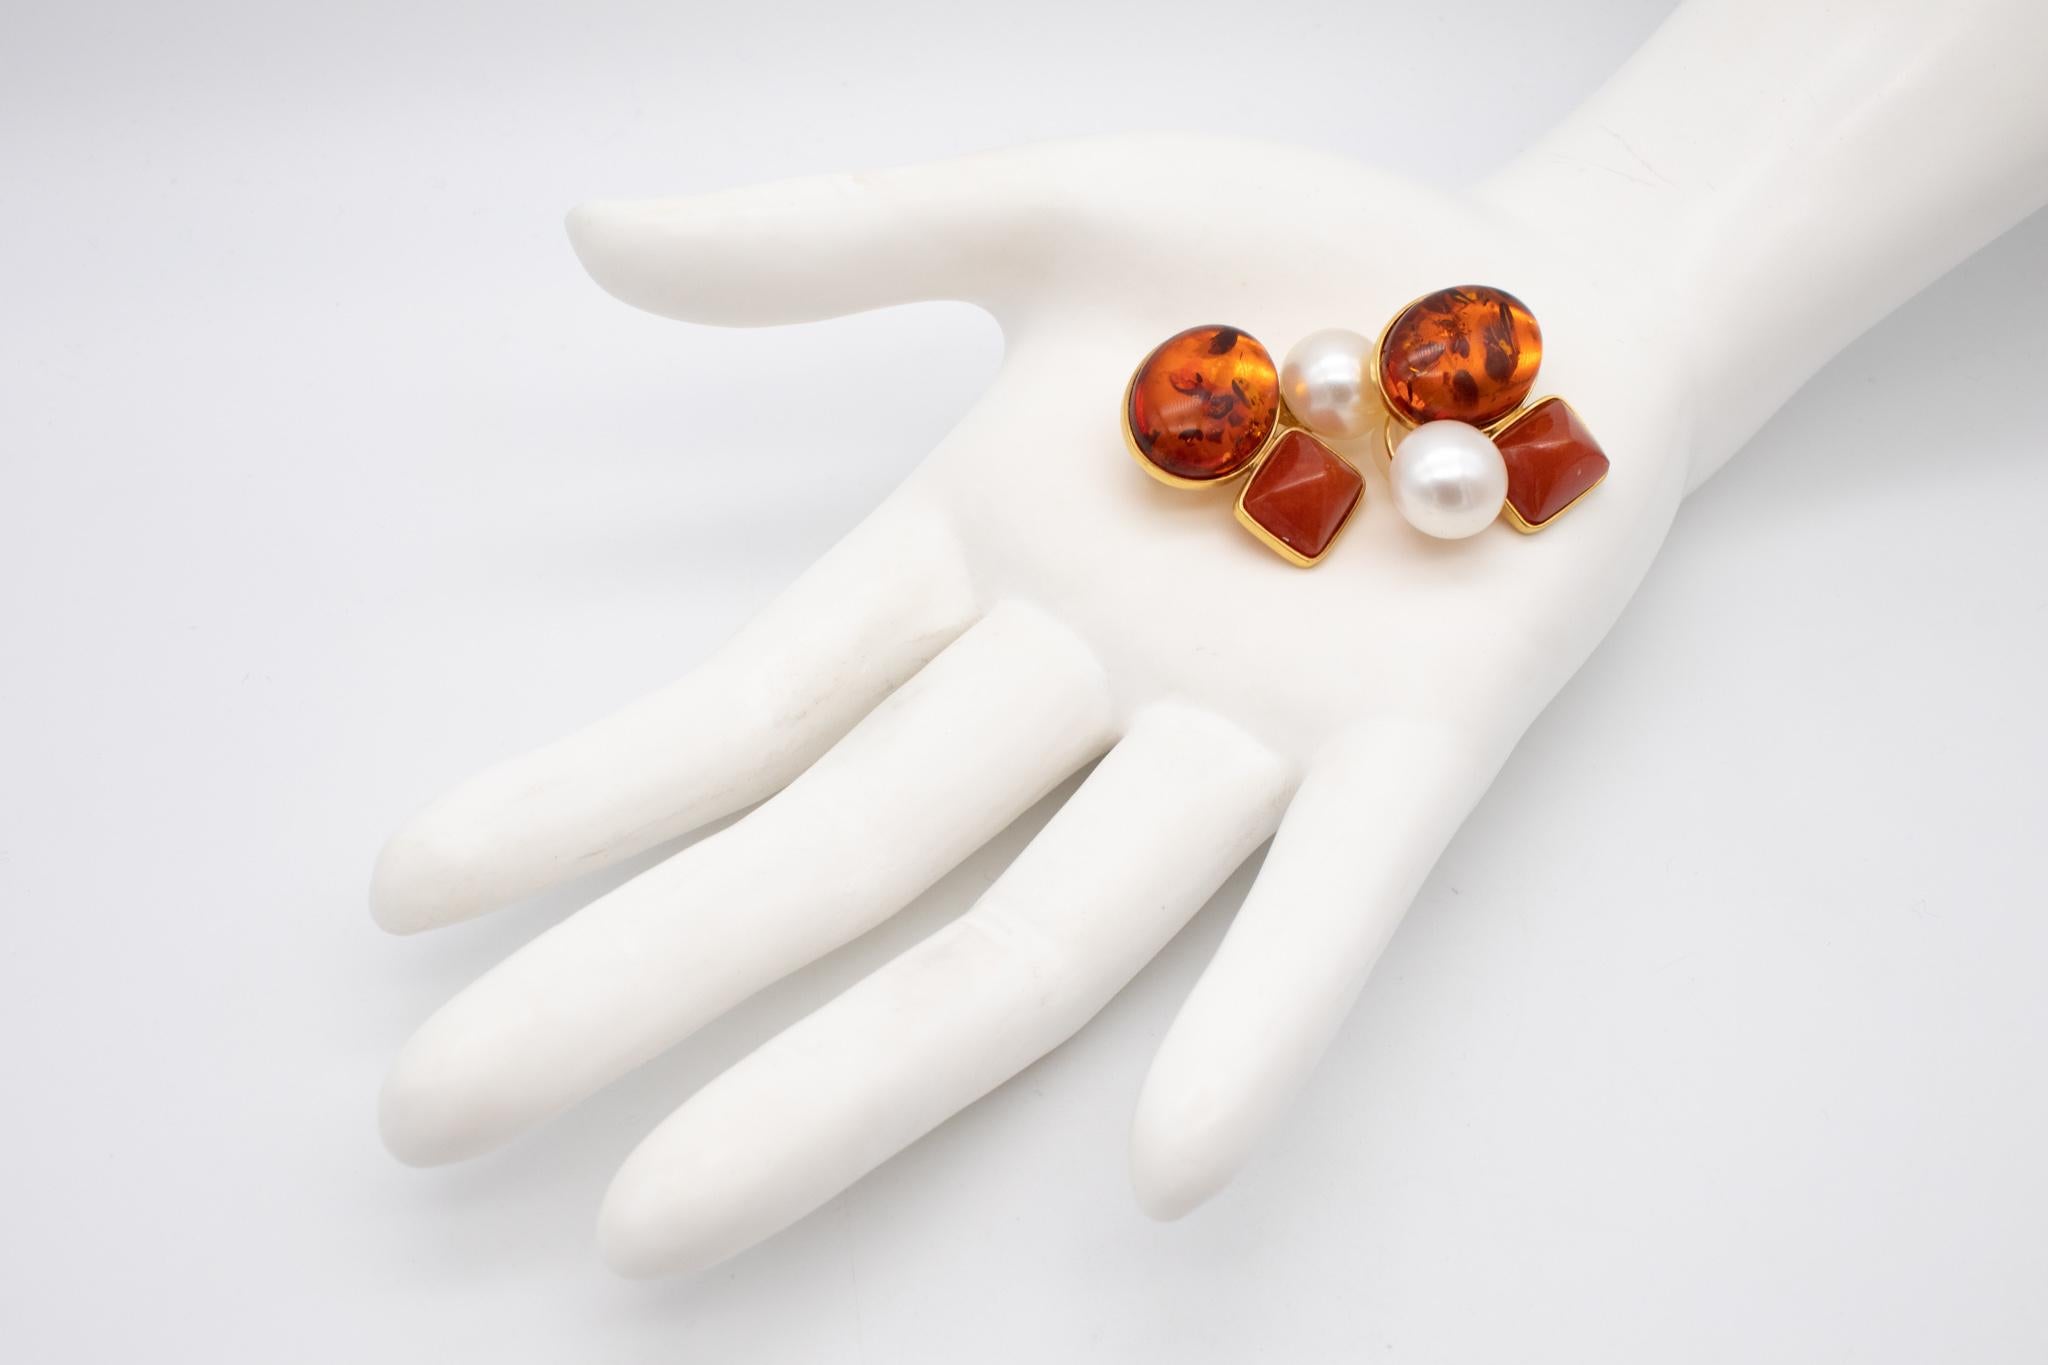 Cabochon Designer KJ Modern Earrings in 18Kt Yellow Gold with Amber, Jasper and Pearls